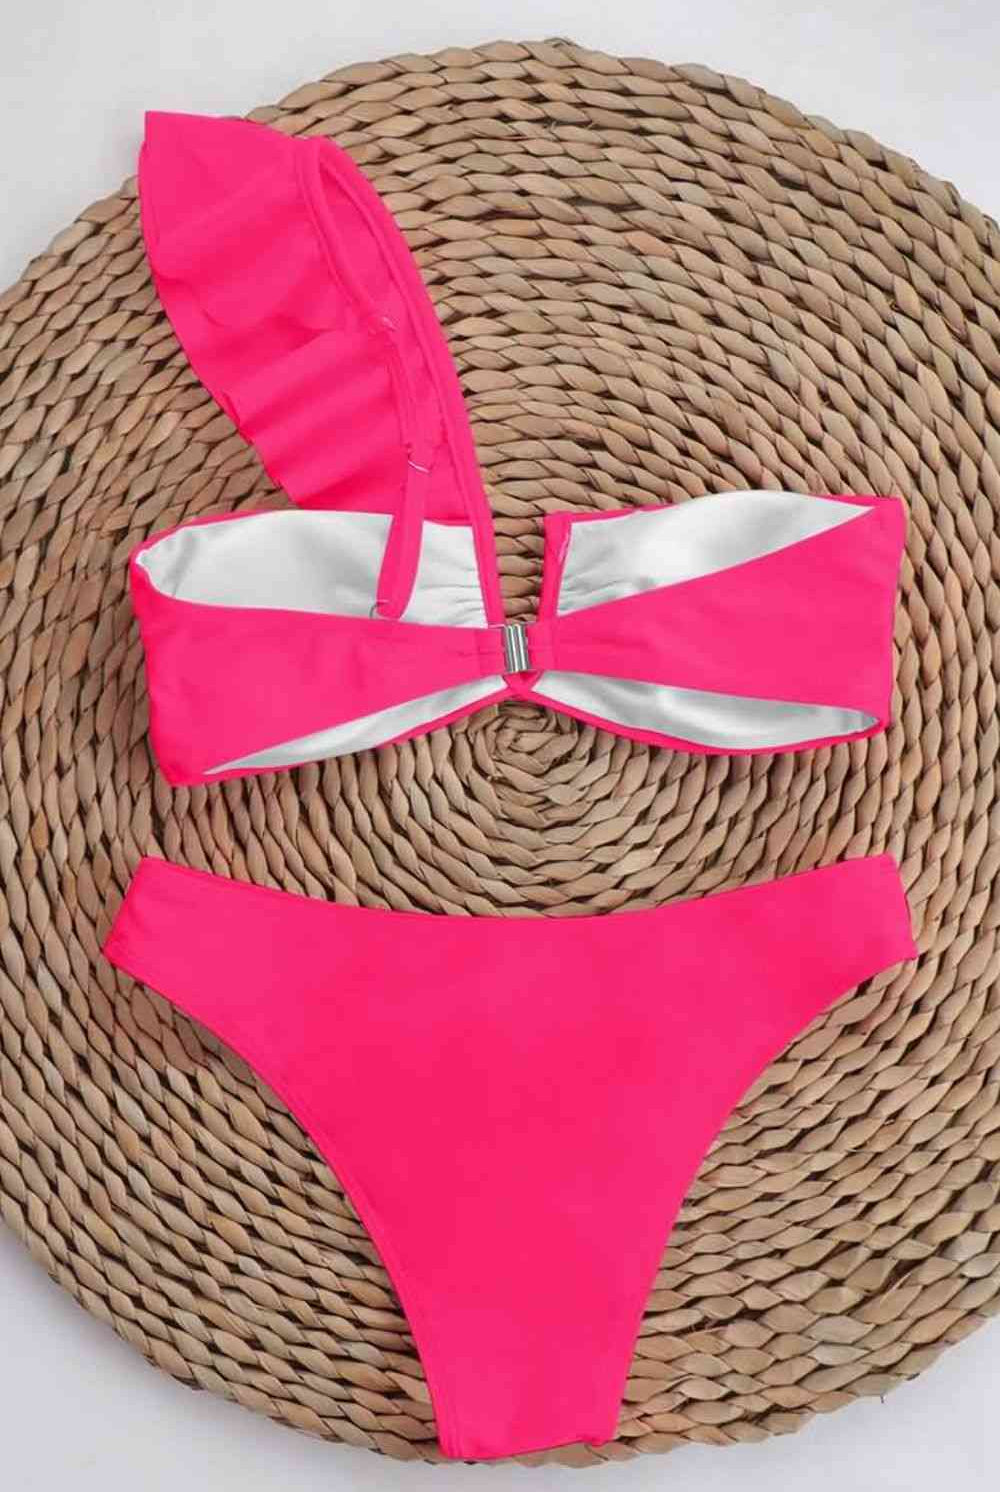 Smiling woman by the pool in a vibrant pink ruffled one-shoulder bikini top and matching low-rise bikini bottoms.